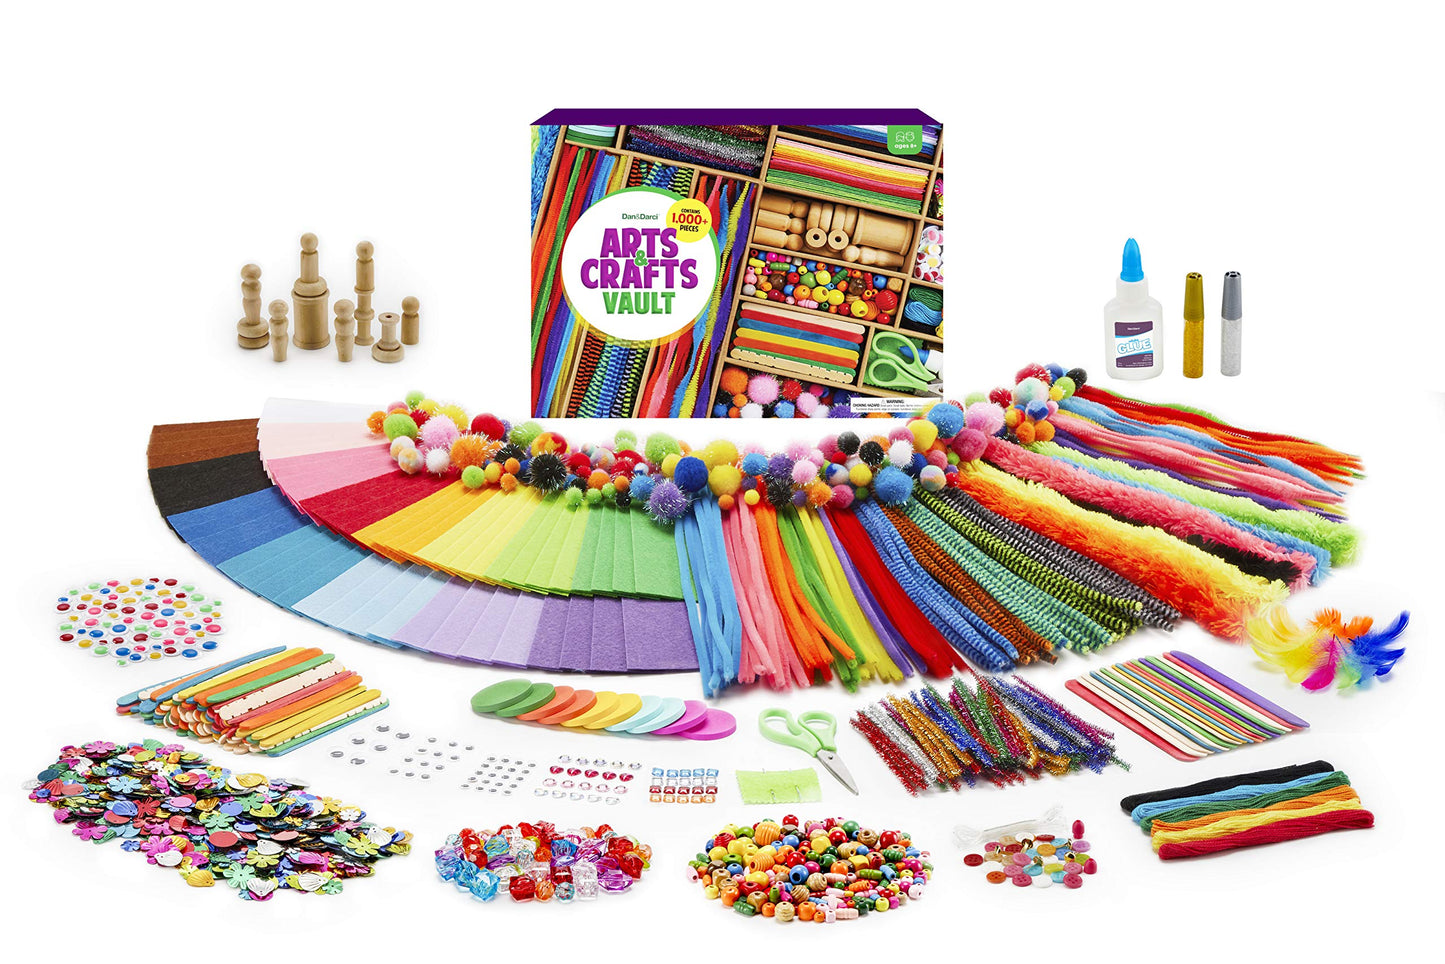 Arts and Crafts Vault - 1000+ Piece Craft Supplies Kit Library in a Box for Kids Ages 4 5 6 7 8 9 10 11 & 12 Year Old Girls & Boys - Crafting Set